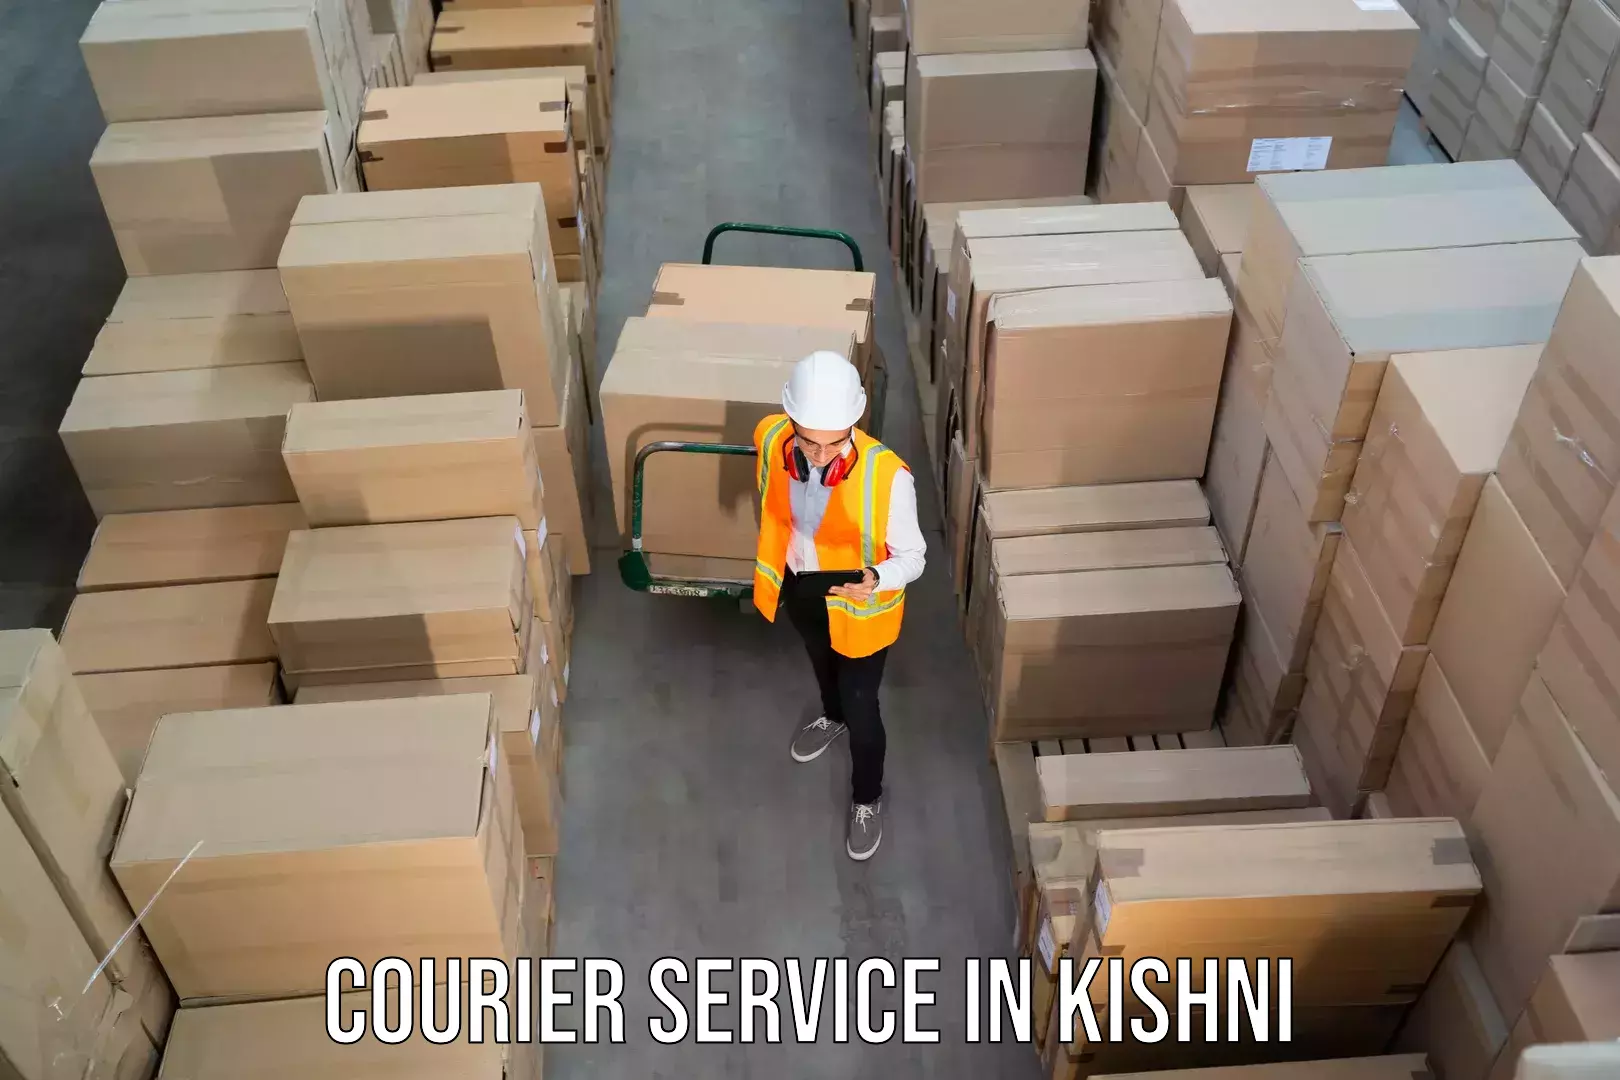 Tailored freight services in Kishni